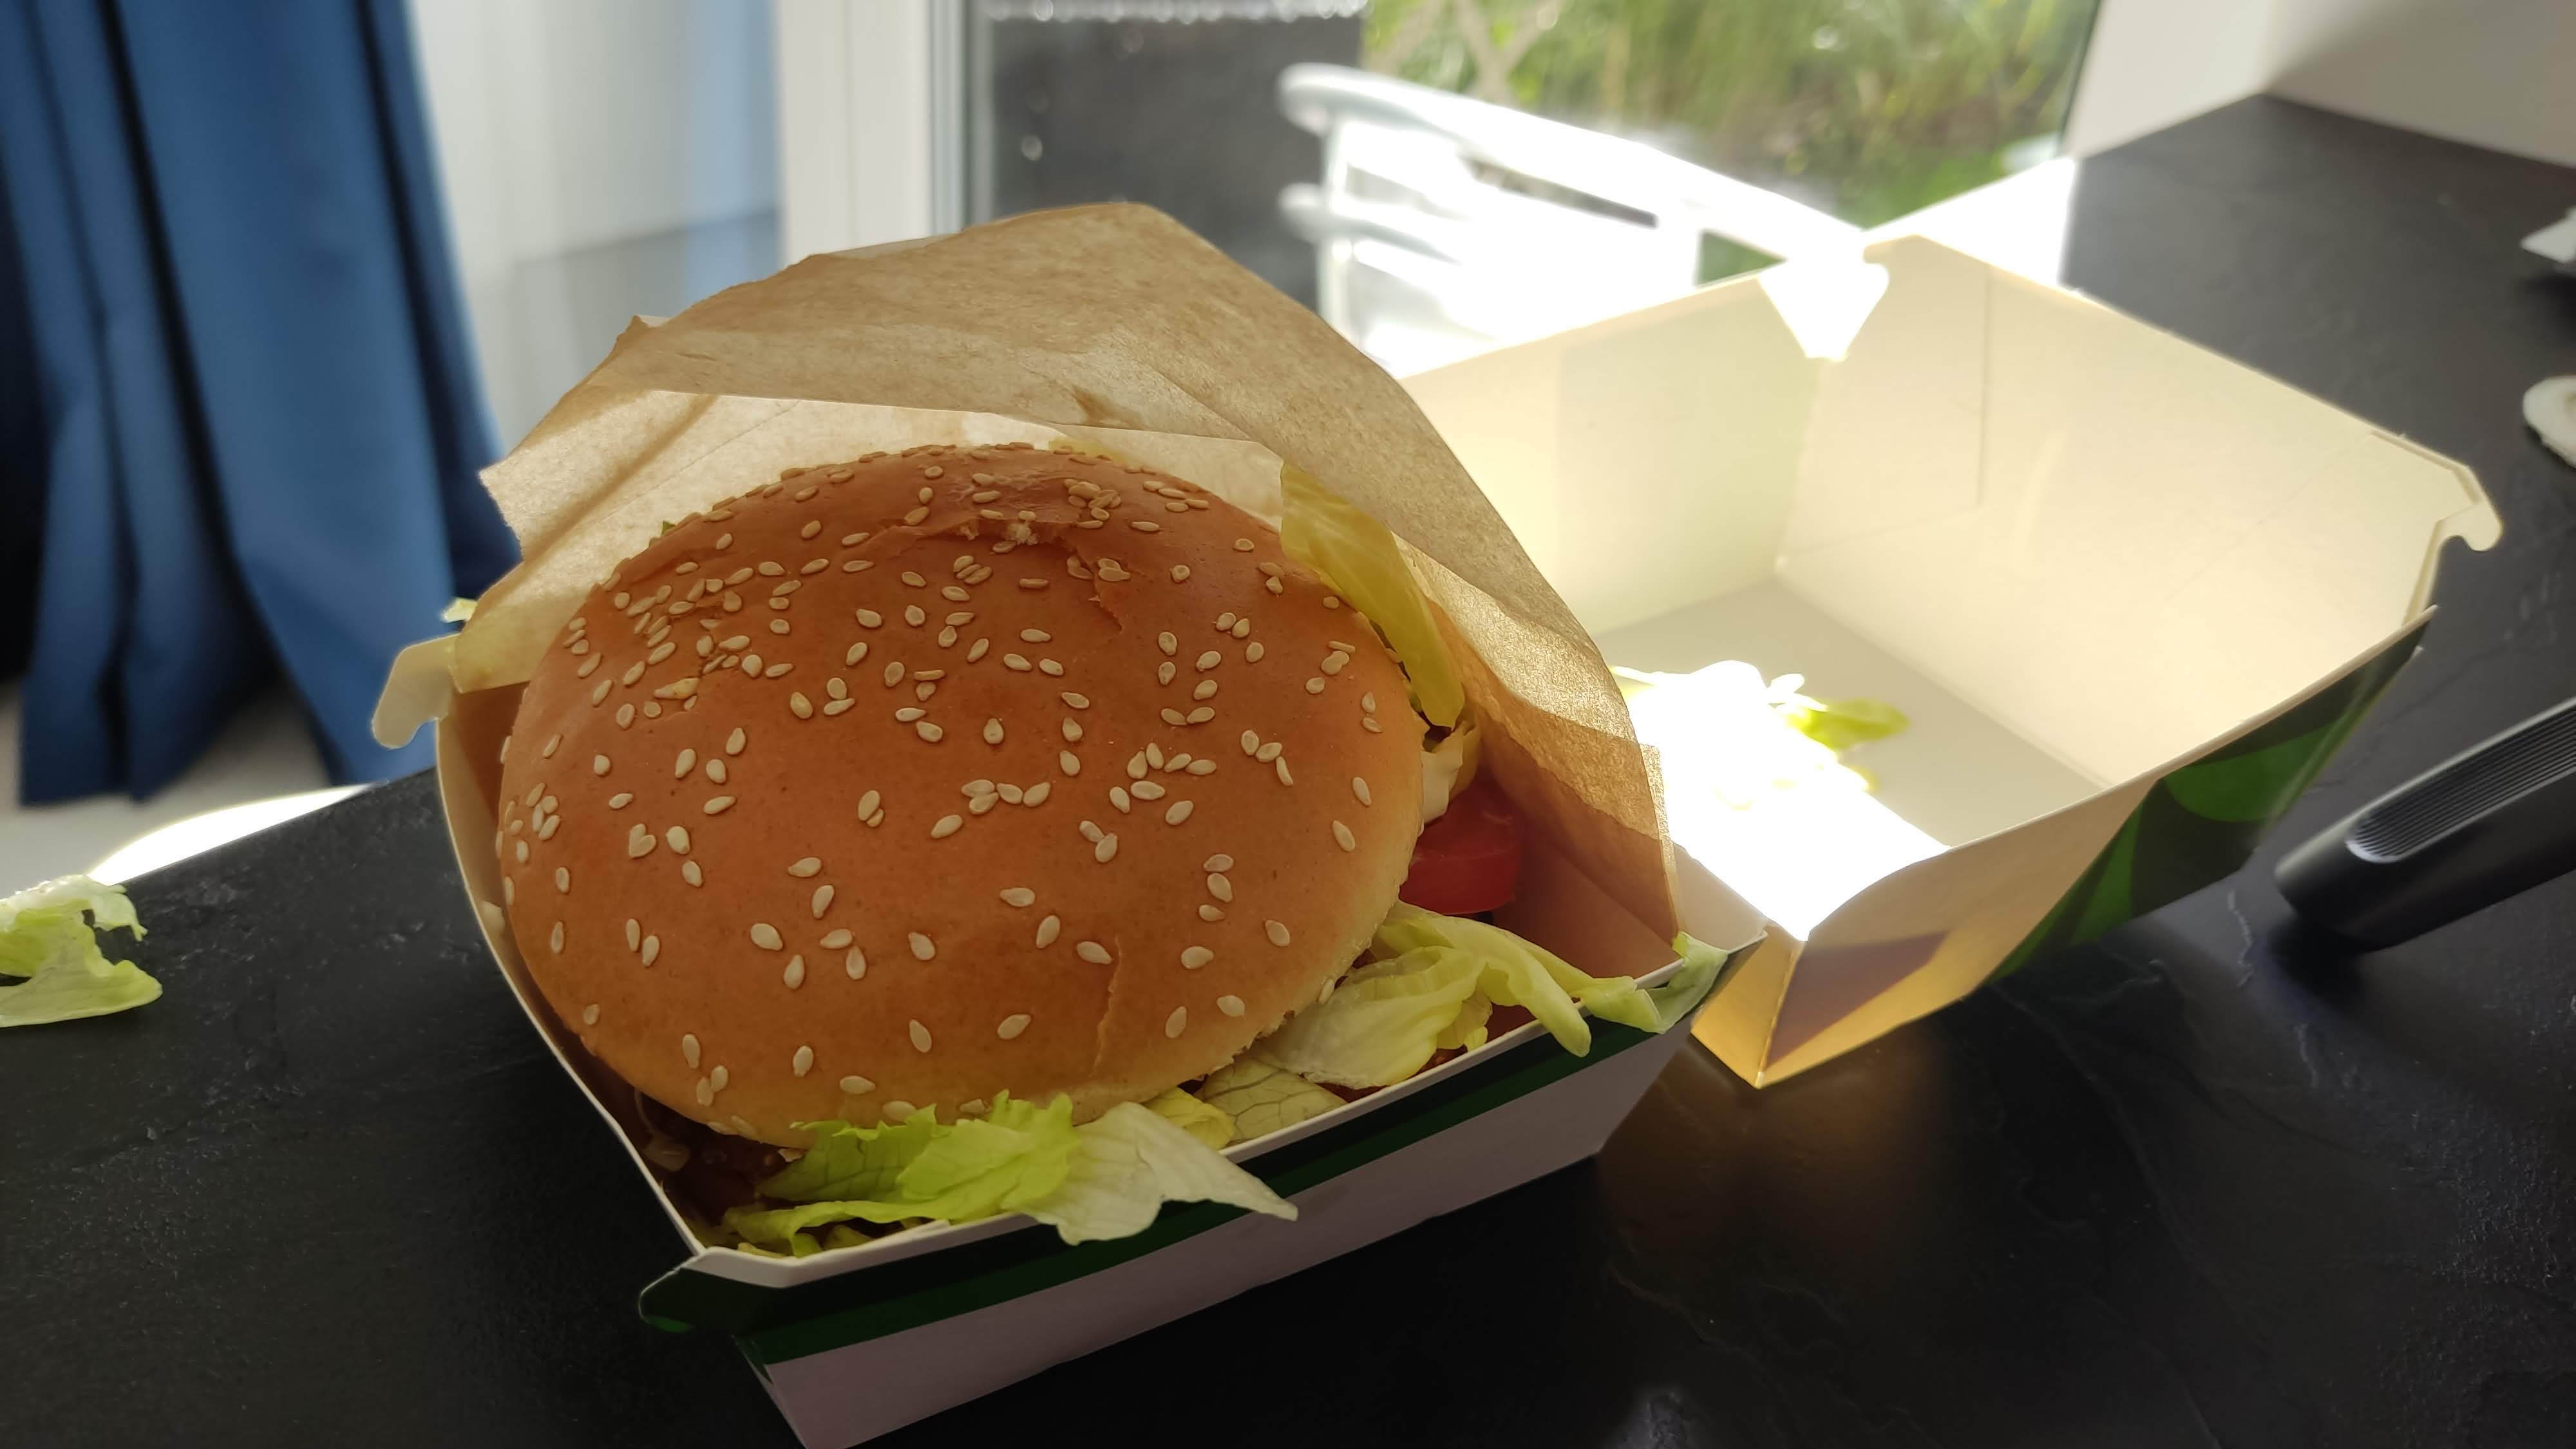 The McDonald's Veggie Burger: A Taste of Poland's Green Revolution : Veggie burger in its open carton box and presented in a paper wrap